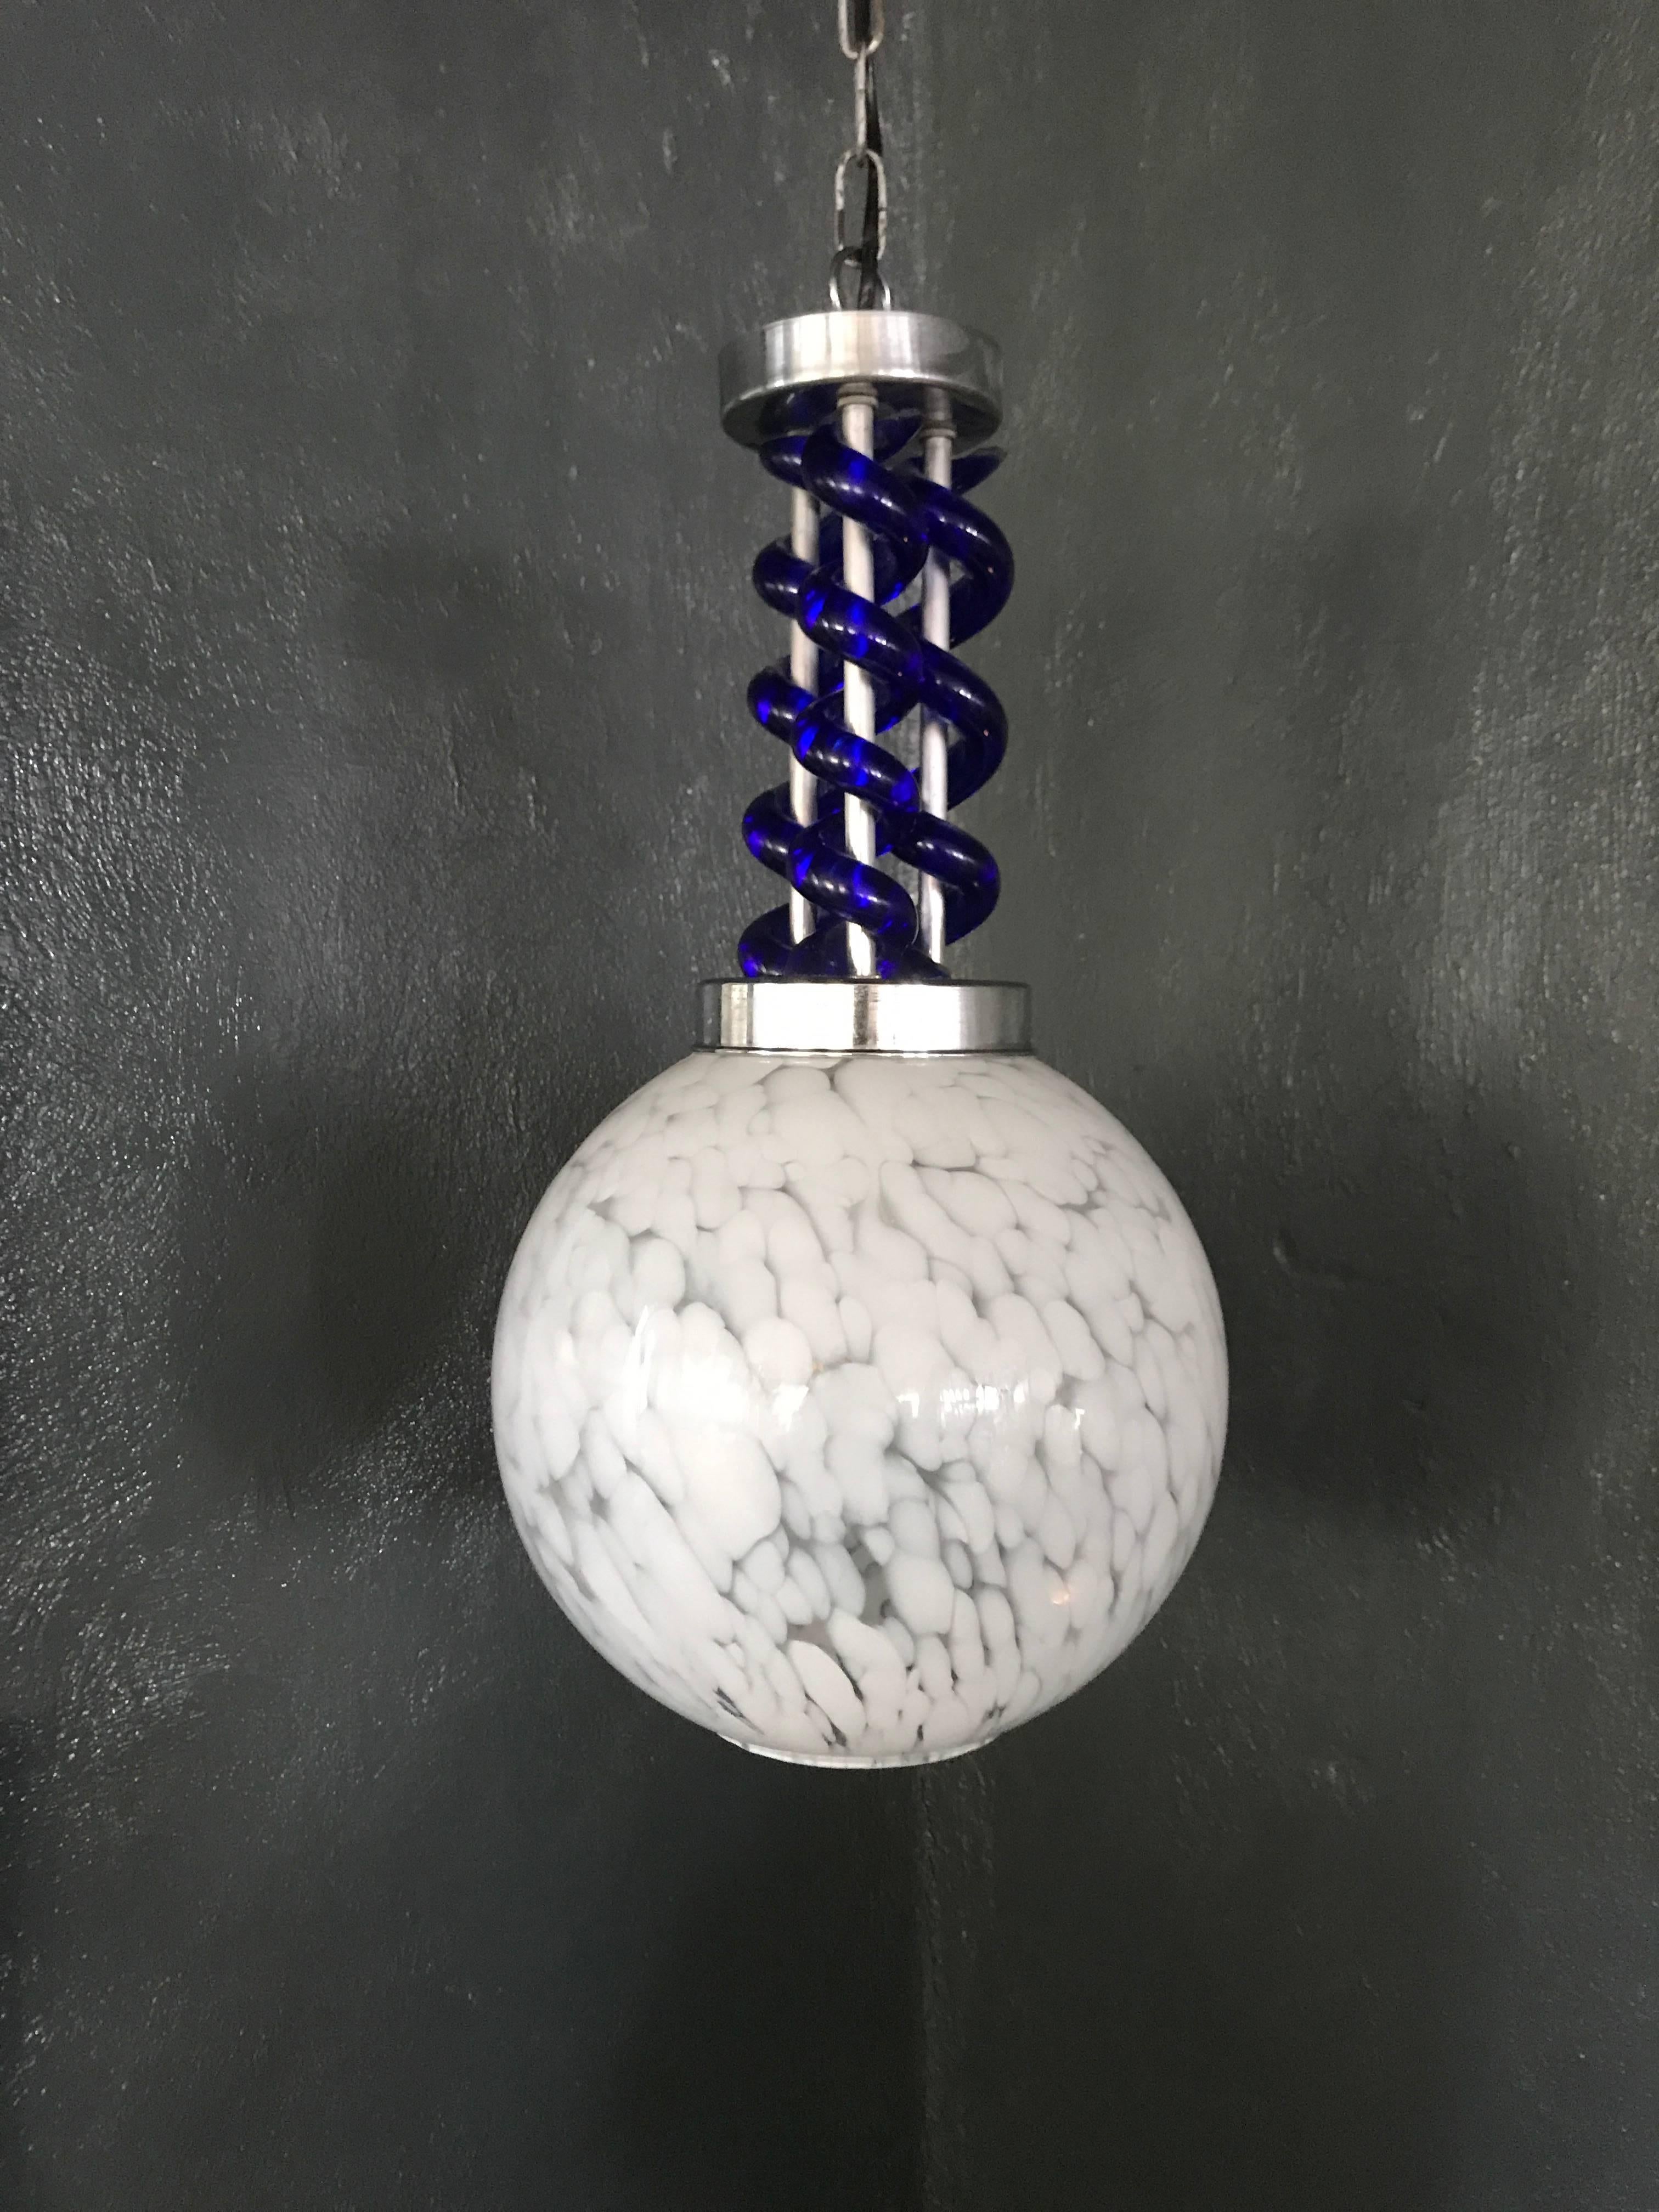 Beautiful chandelier attributed to Venini, it consists of three spirals in a rich blue Murano glass and the Lower sphere, 
Measures: 49 cm long with a 25cm diameter.